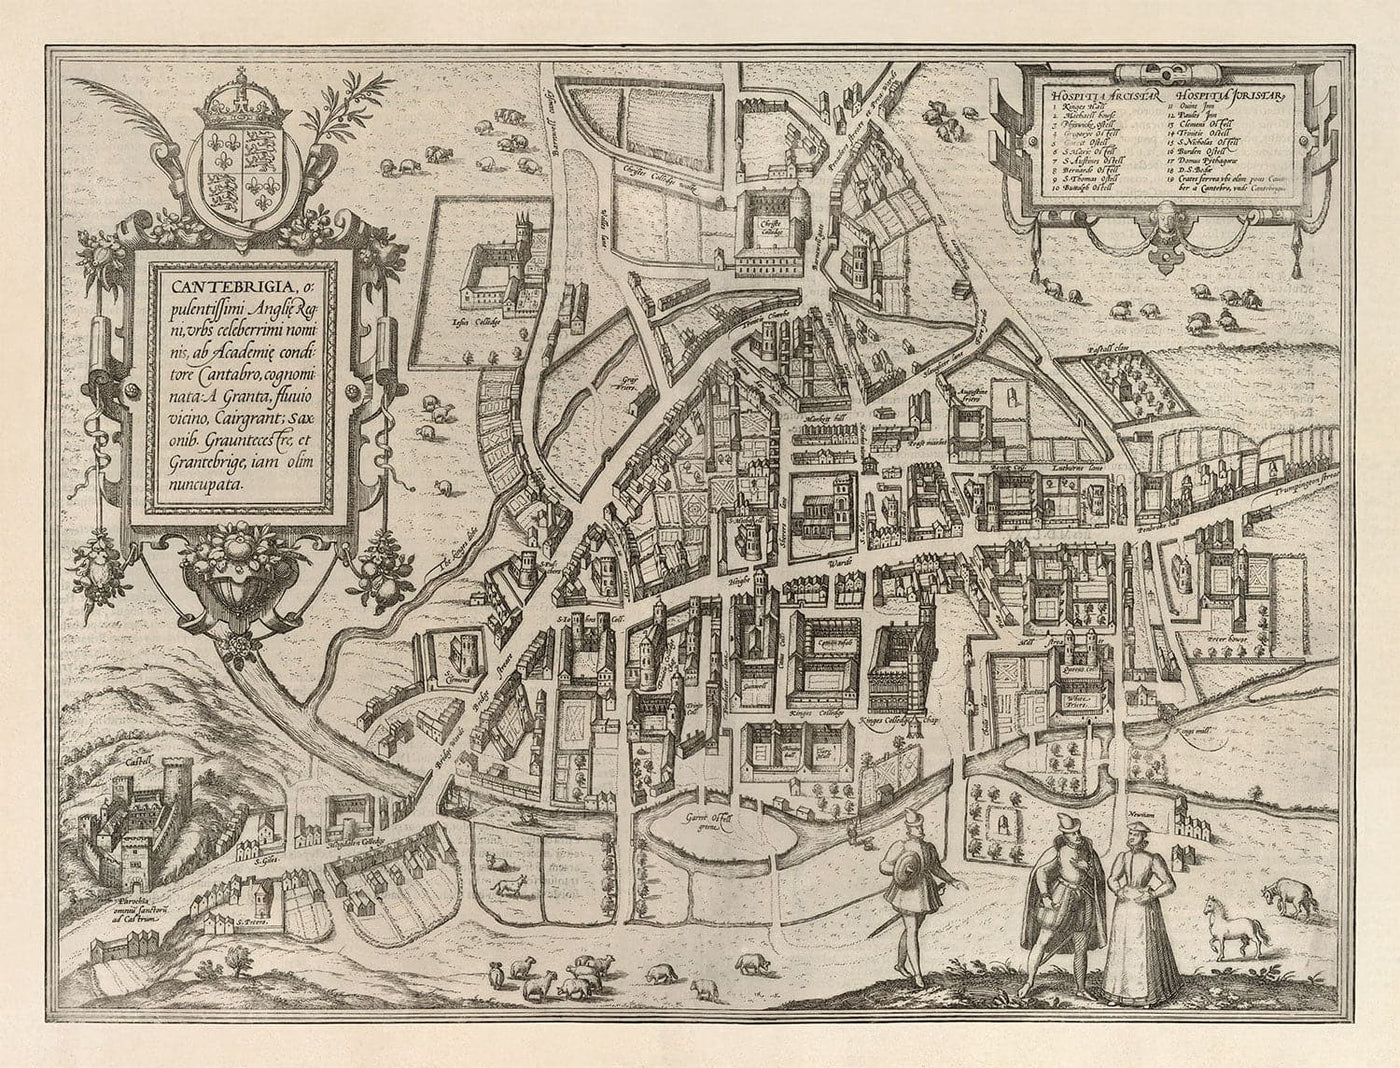 Old Map of Cambridge and University Colleges, 1575 by Georg Braun - Trinity, Kings, Queens, Clare